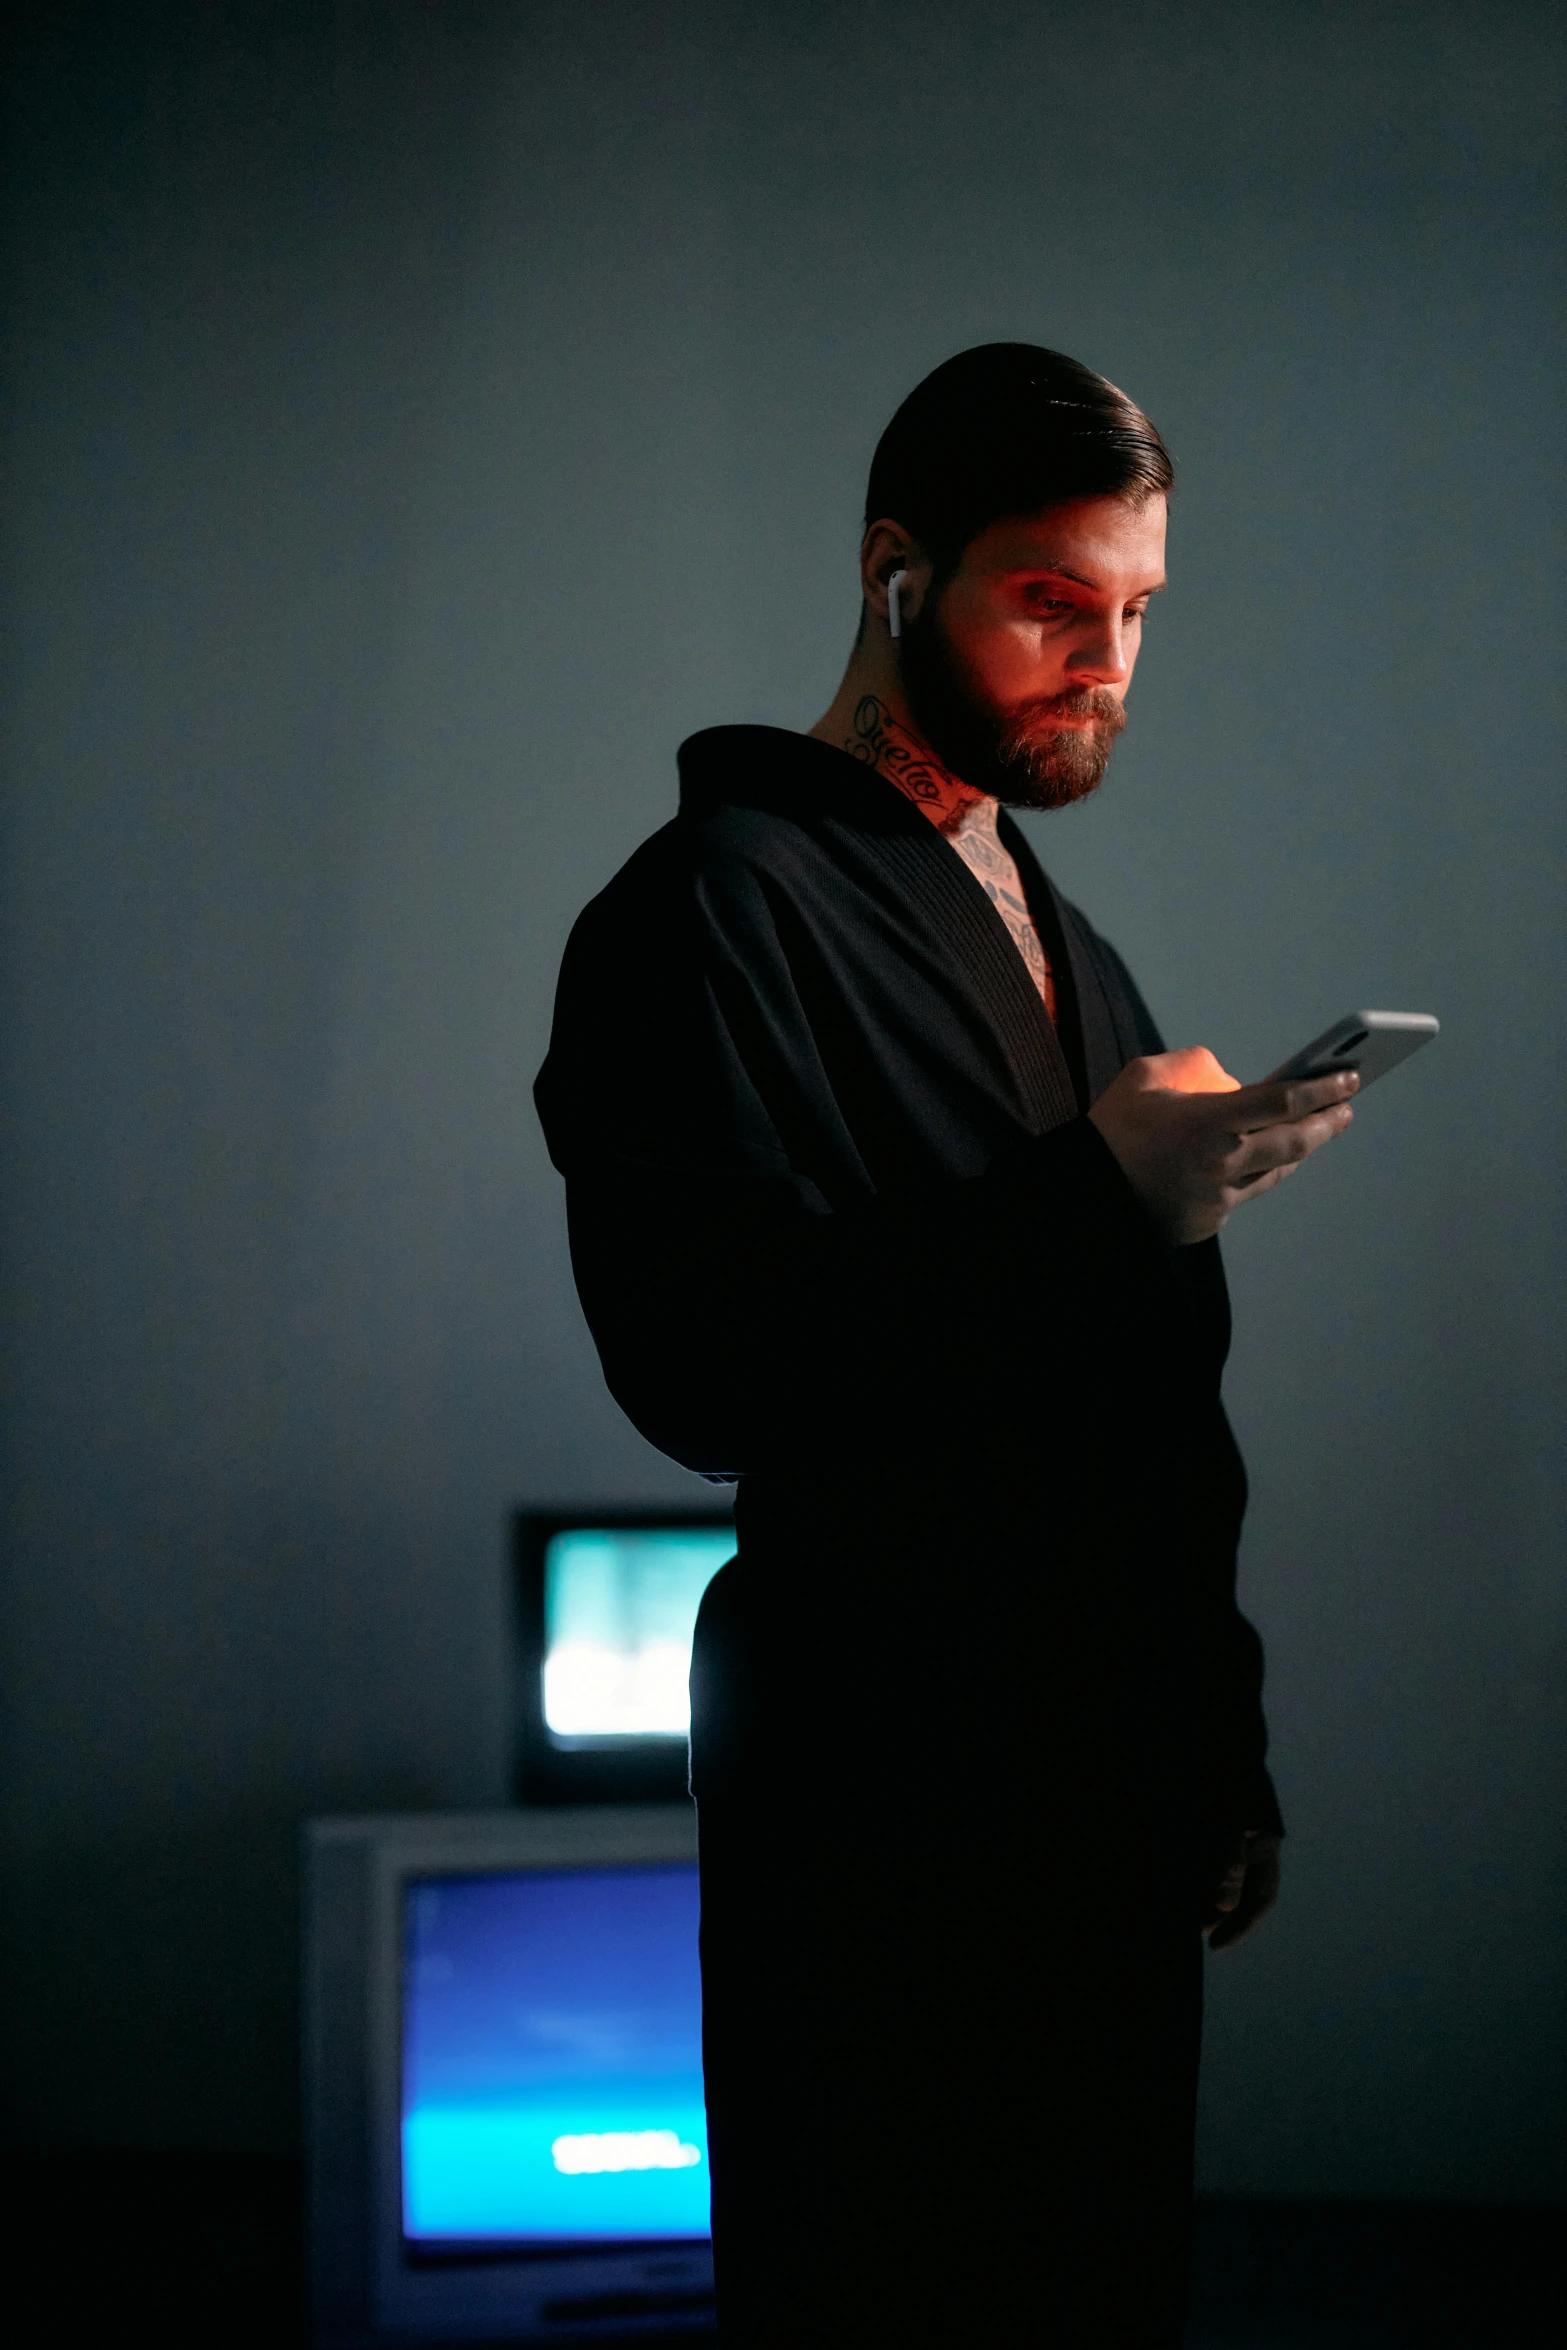 a man standing in front of a television holding a cell phone, trending on reddit, renaissance, sith lord. dramatic lighting, very attractive man with beard, paranoid android, black reflect robe